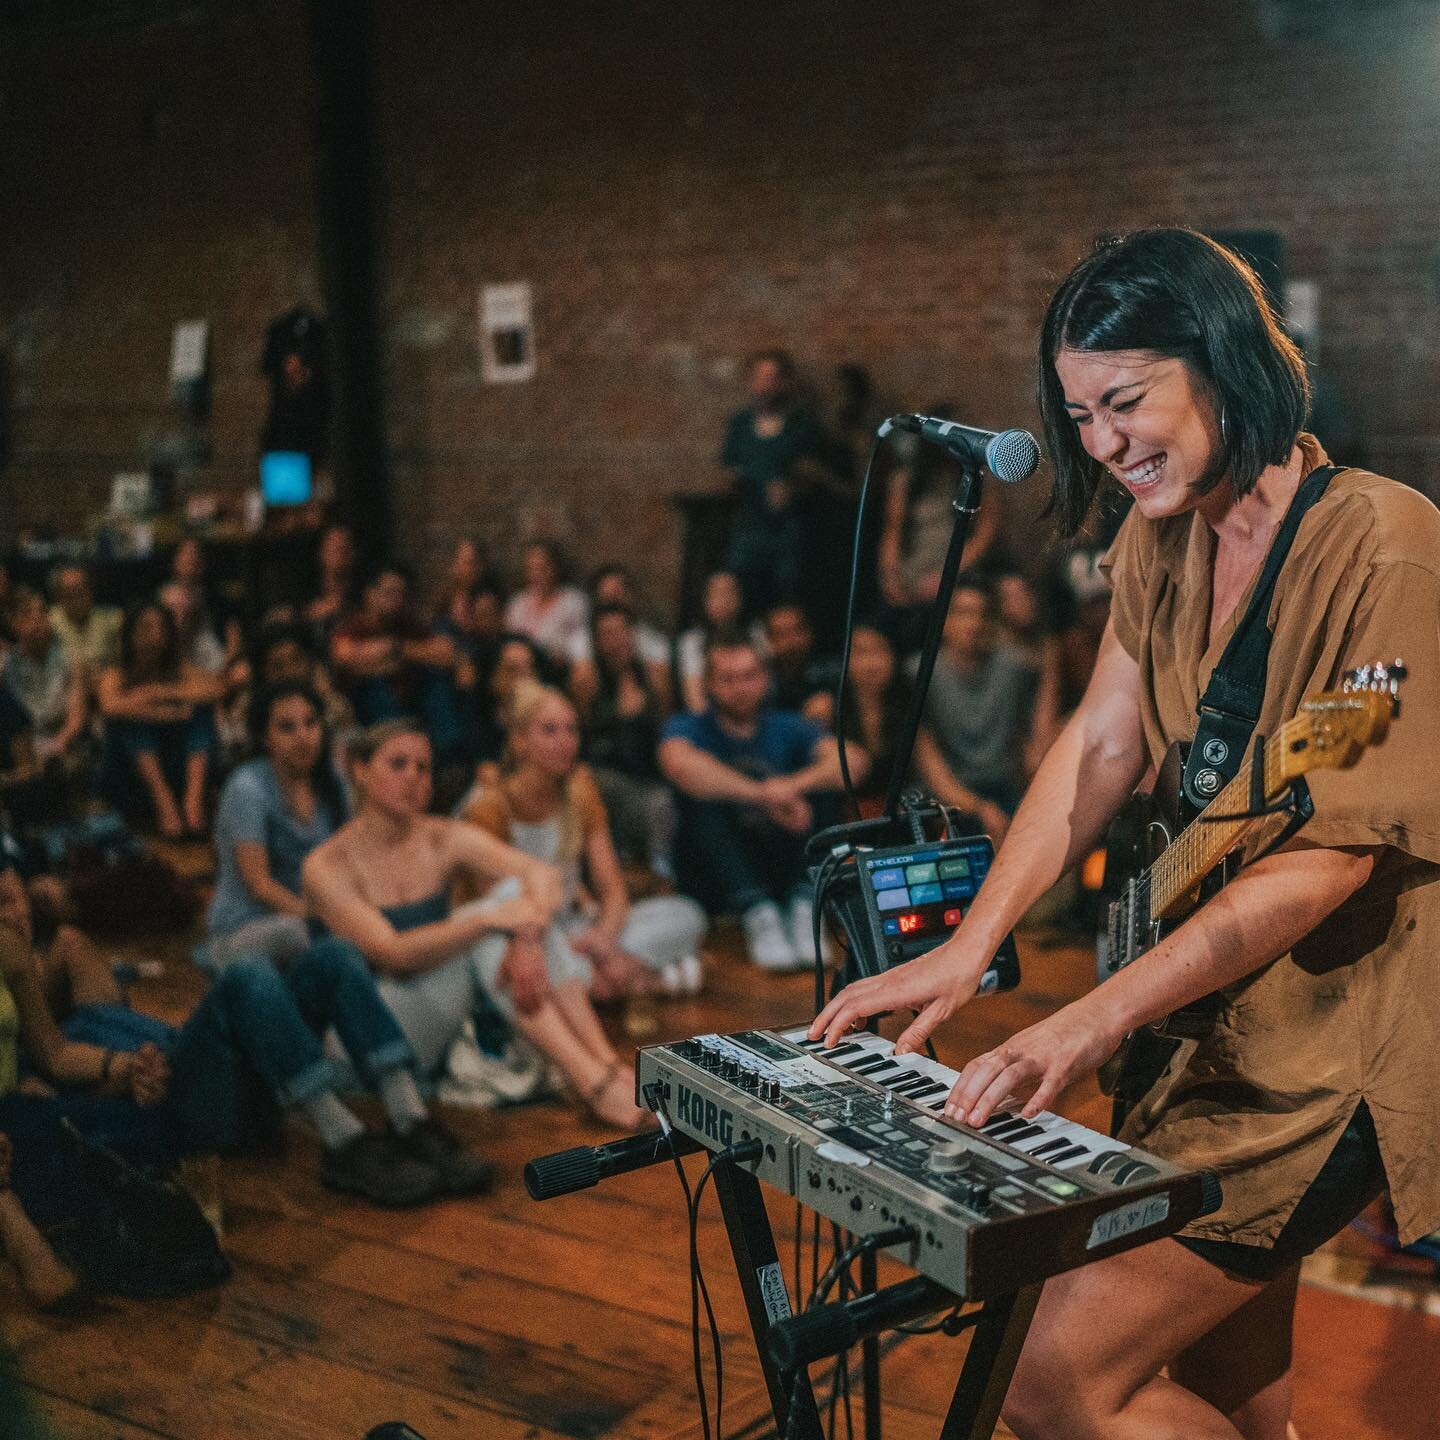 The secret&rsquo;s out! We&rsquo;re hosting a @sofarsounds show this Saturday, November 5th. Grab your tickets at the link in our bio to get access to this intimate concert. The best part? The artists remain a mystery &ndash; you'll find out who they